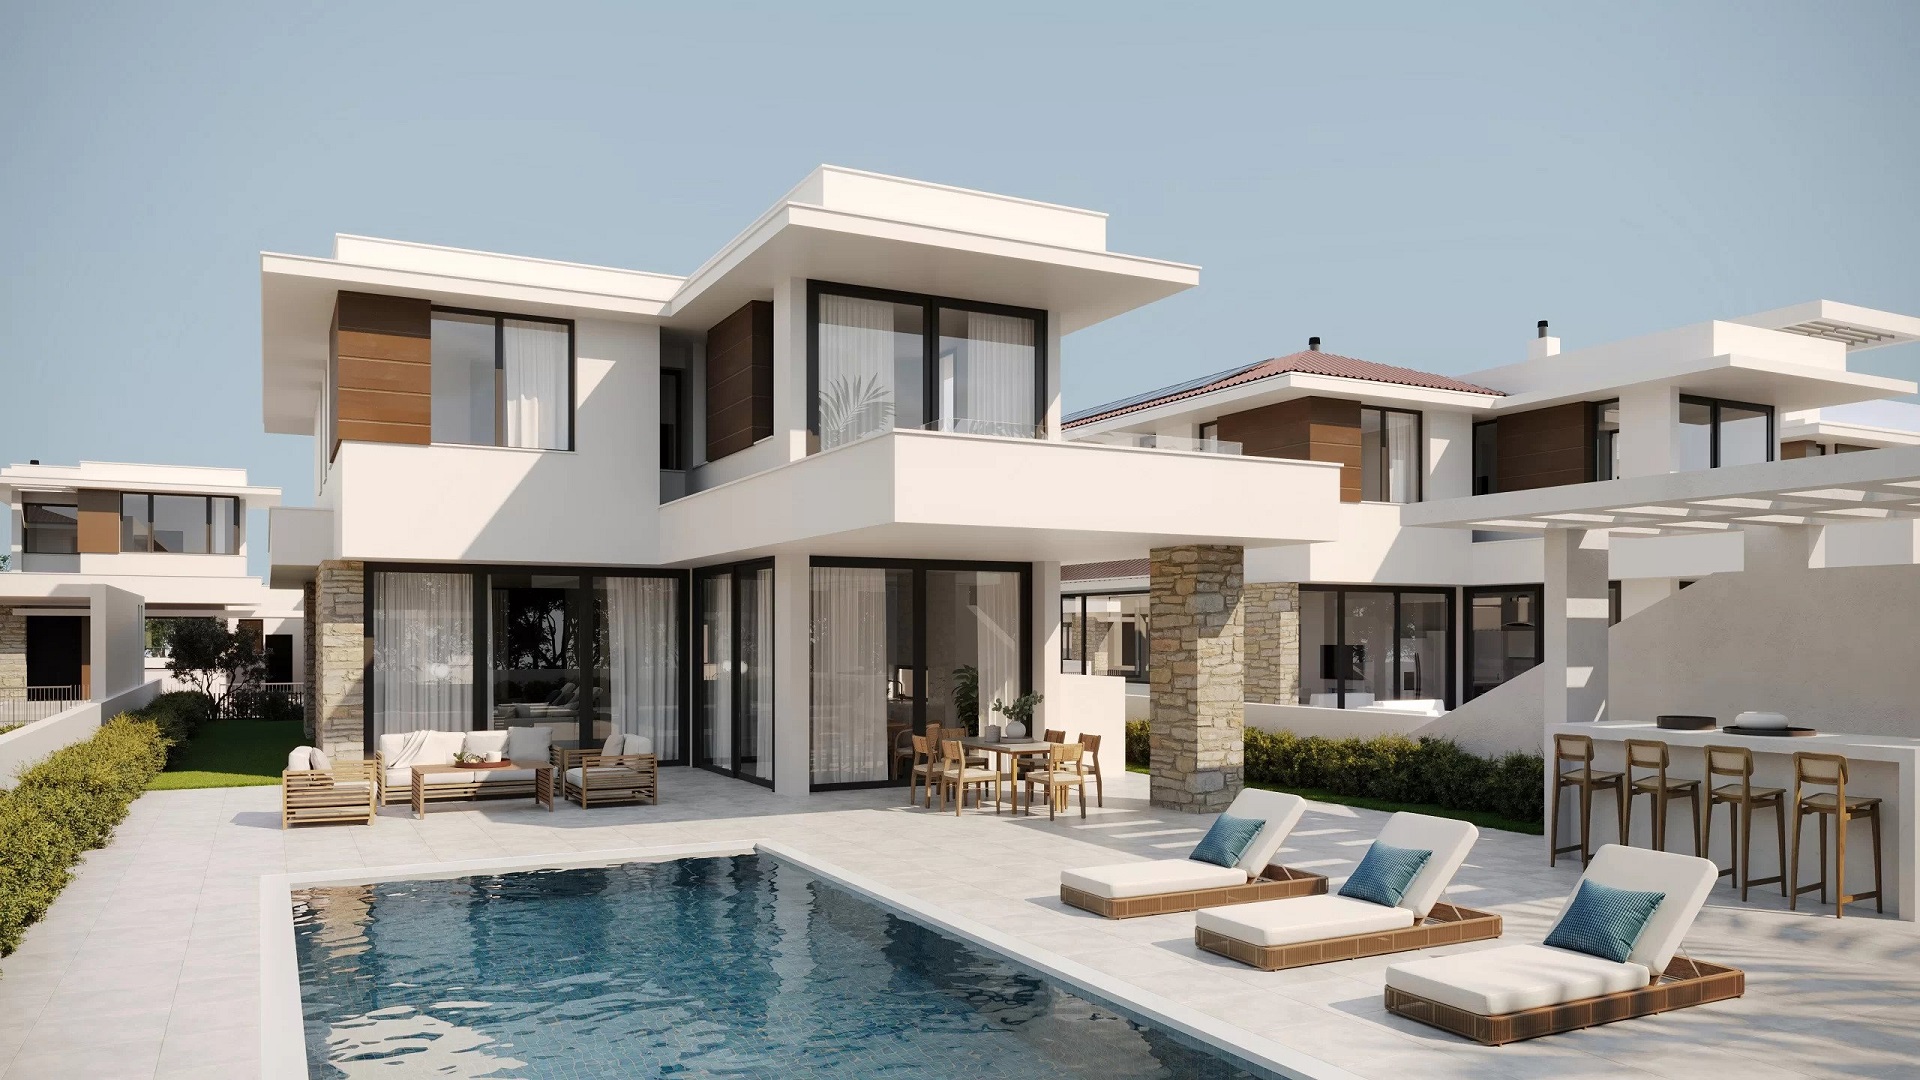 Architectural Visualization of a Residence in Greece